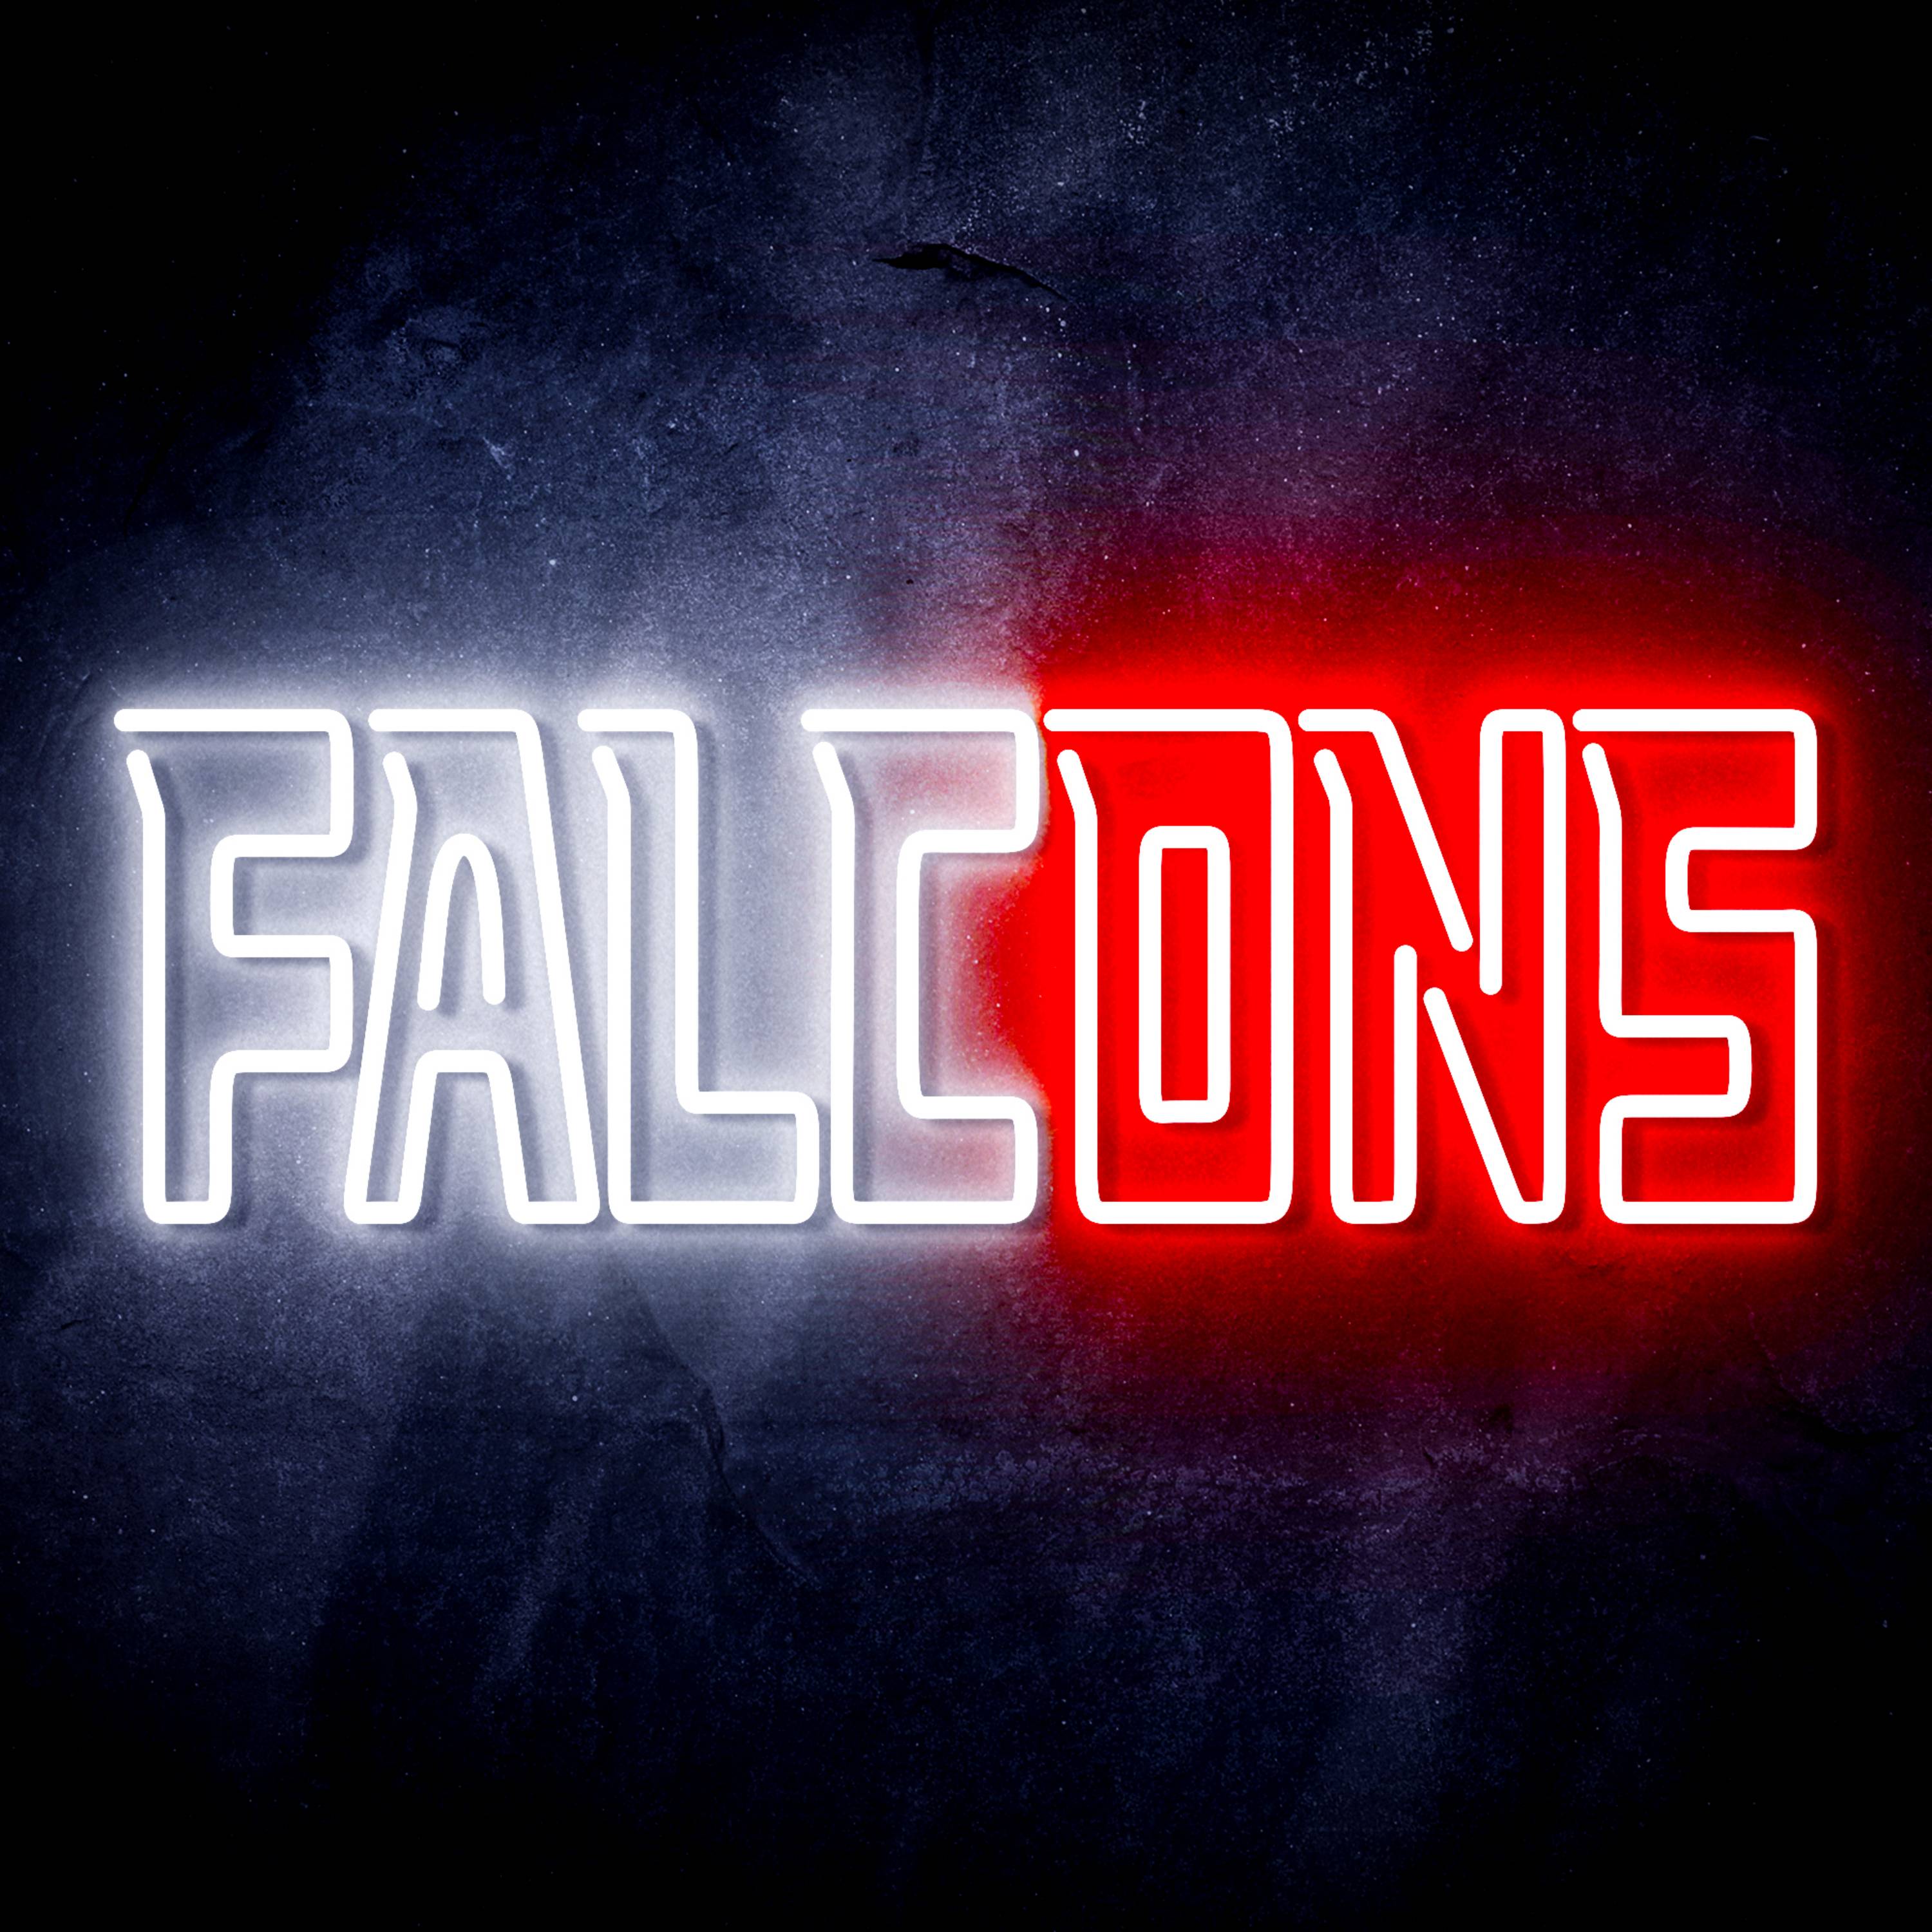 NFL FALCONS LED Neon Sign